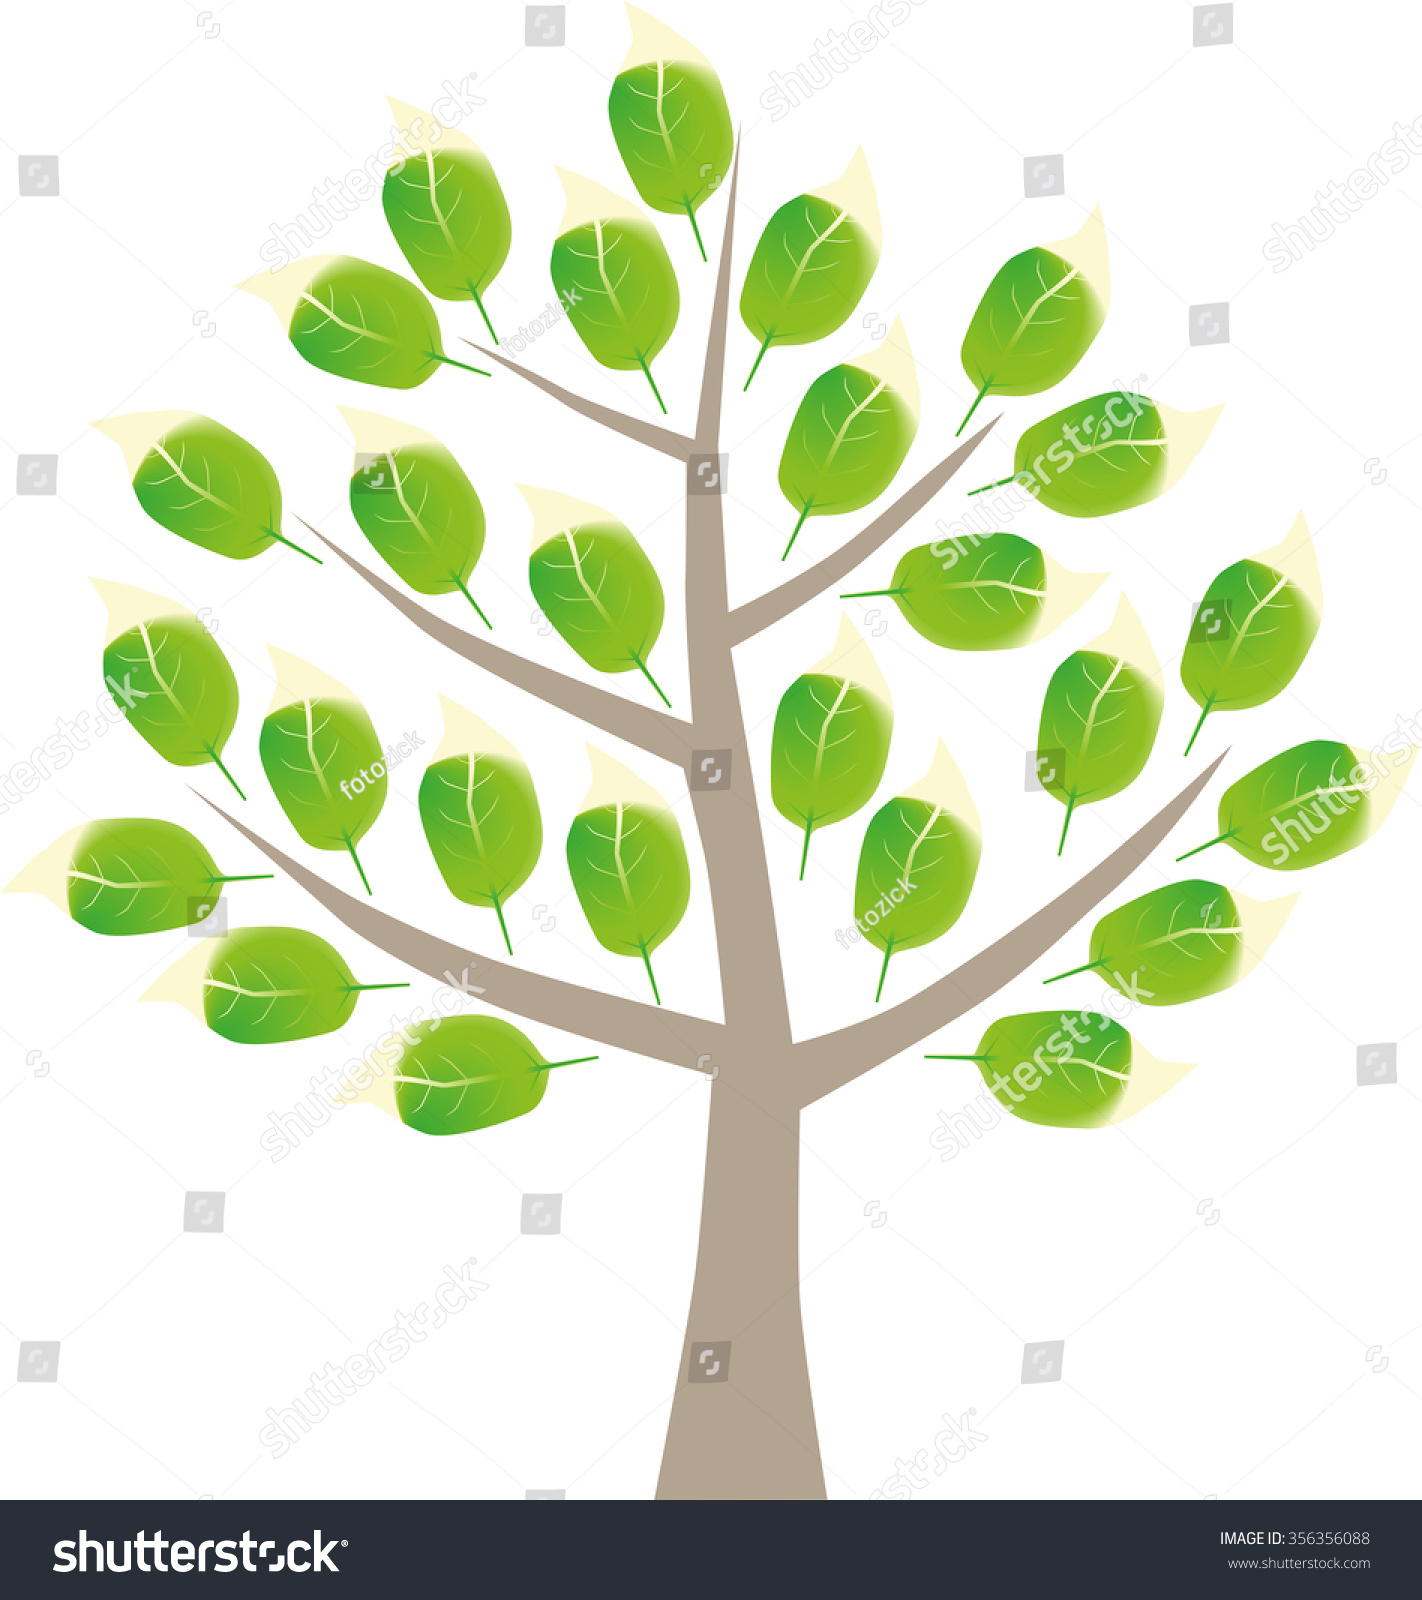 Graphic Of A Deciduous Tree With Spring Foliage, On White Background